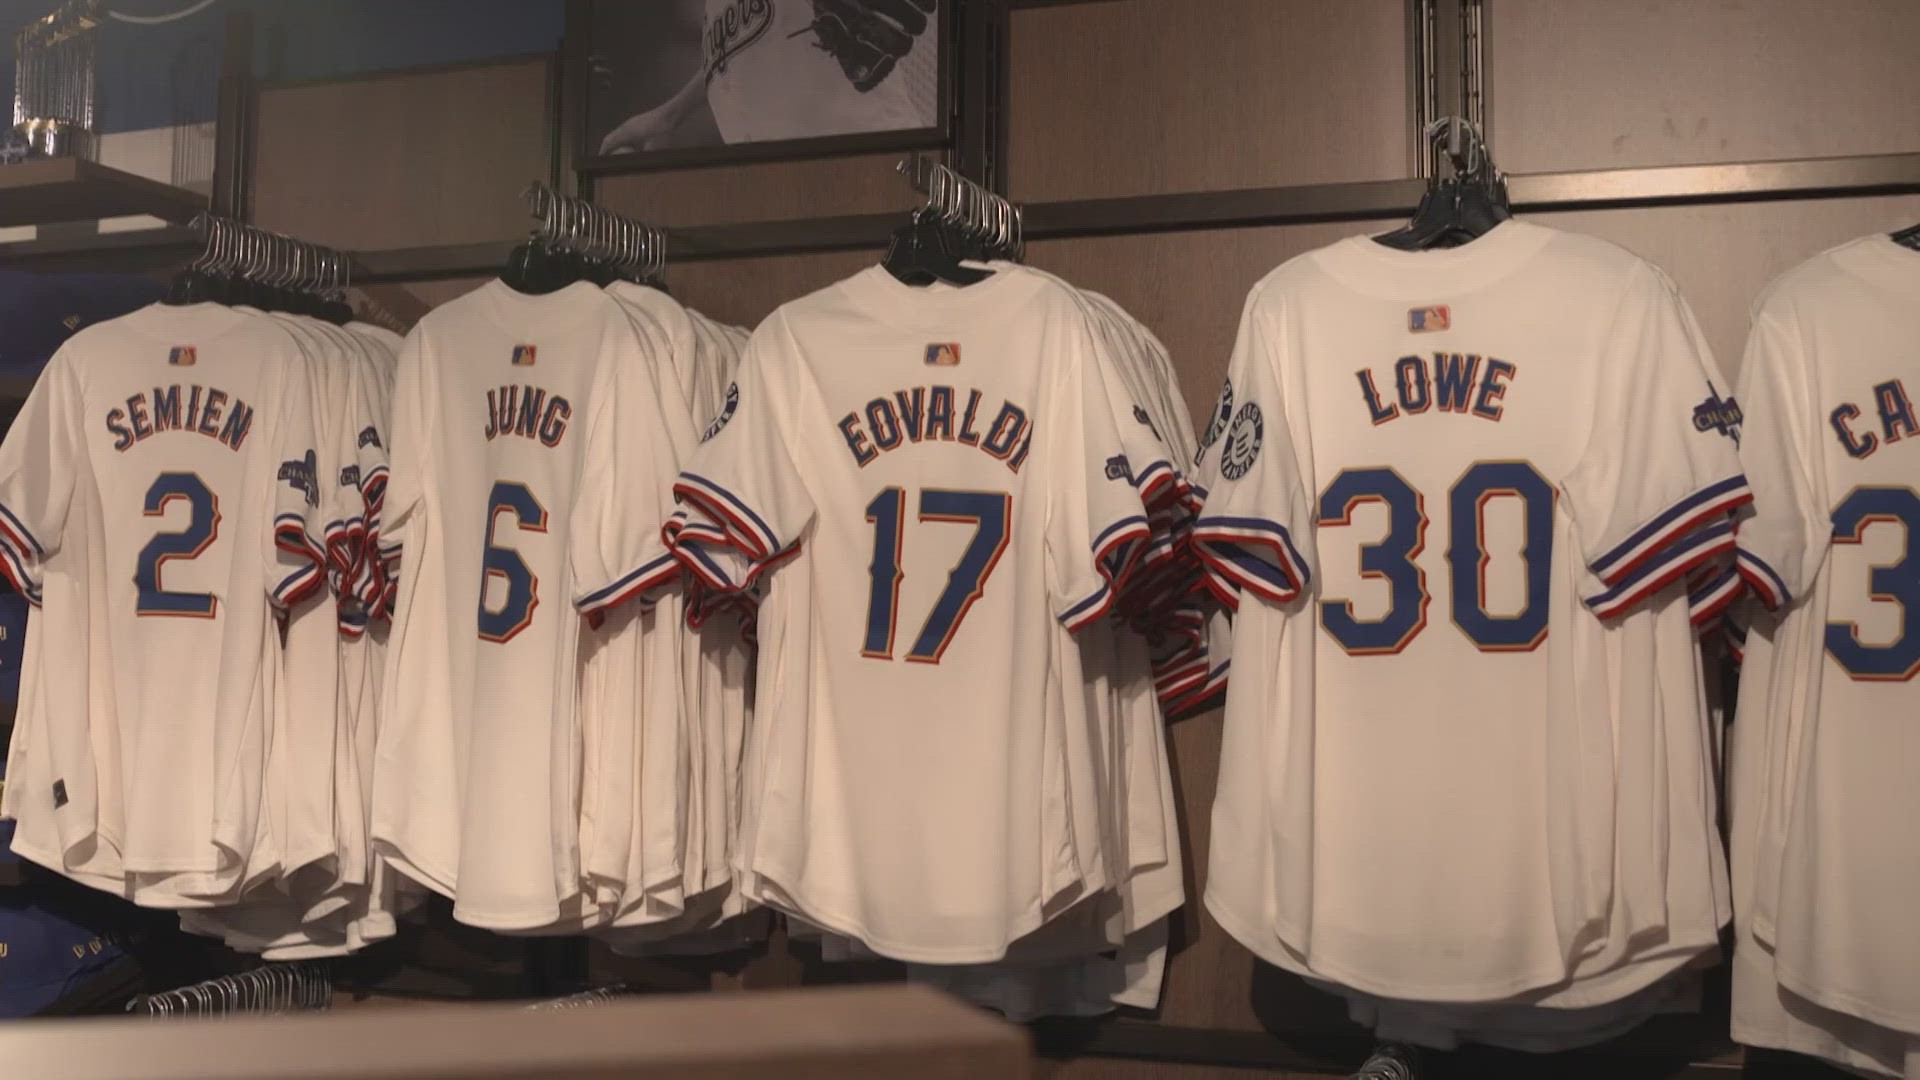 The new jerseys feature the Rangers' numbers trimmed in gold.